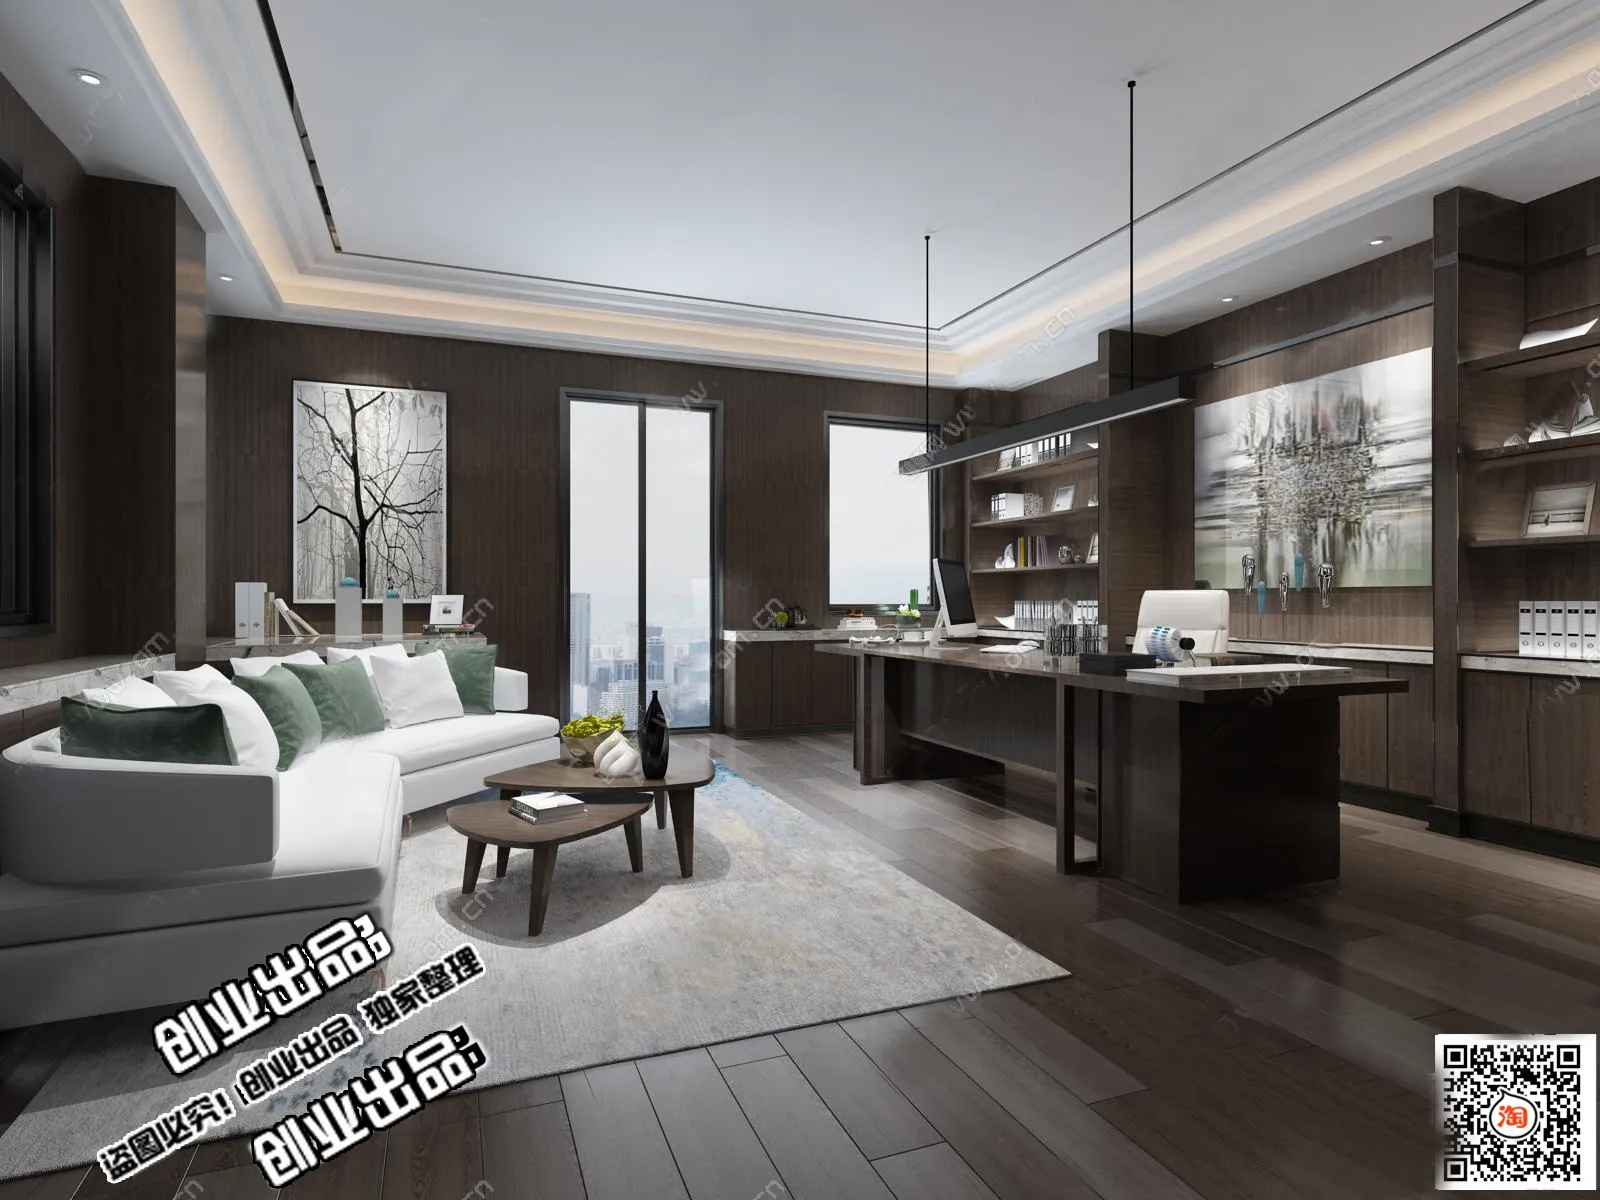 3D OFFICE INTERIOR (VRAY) – MANAGER ROOM 3D SCENES – 168